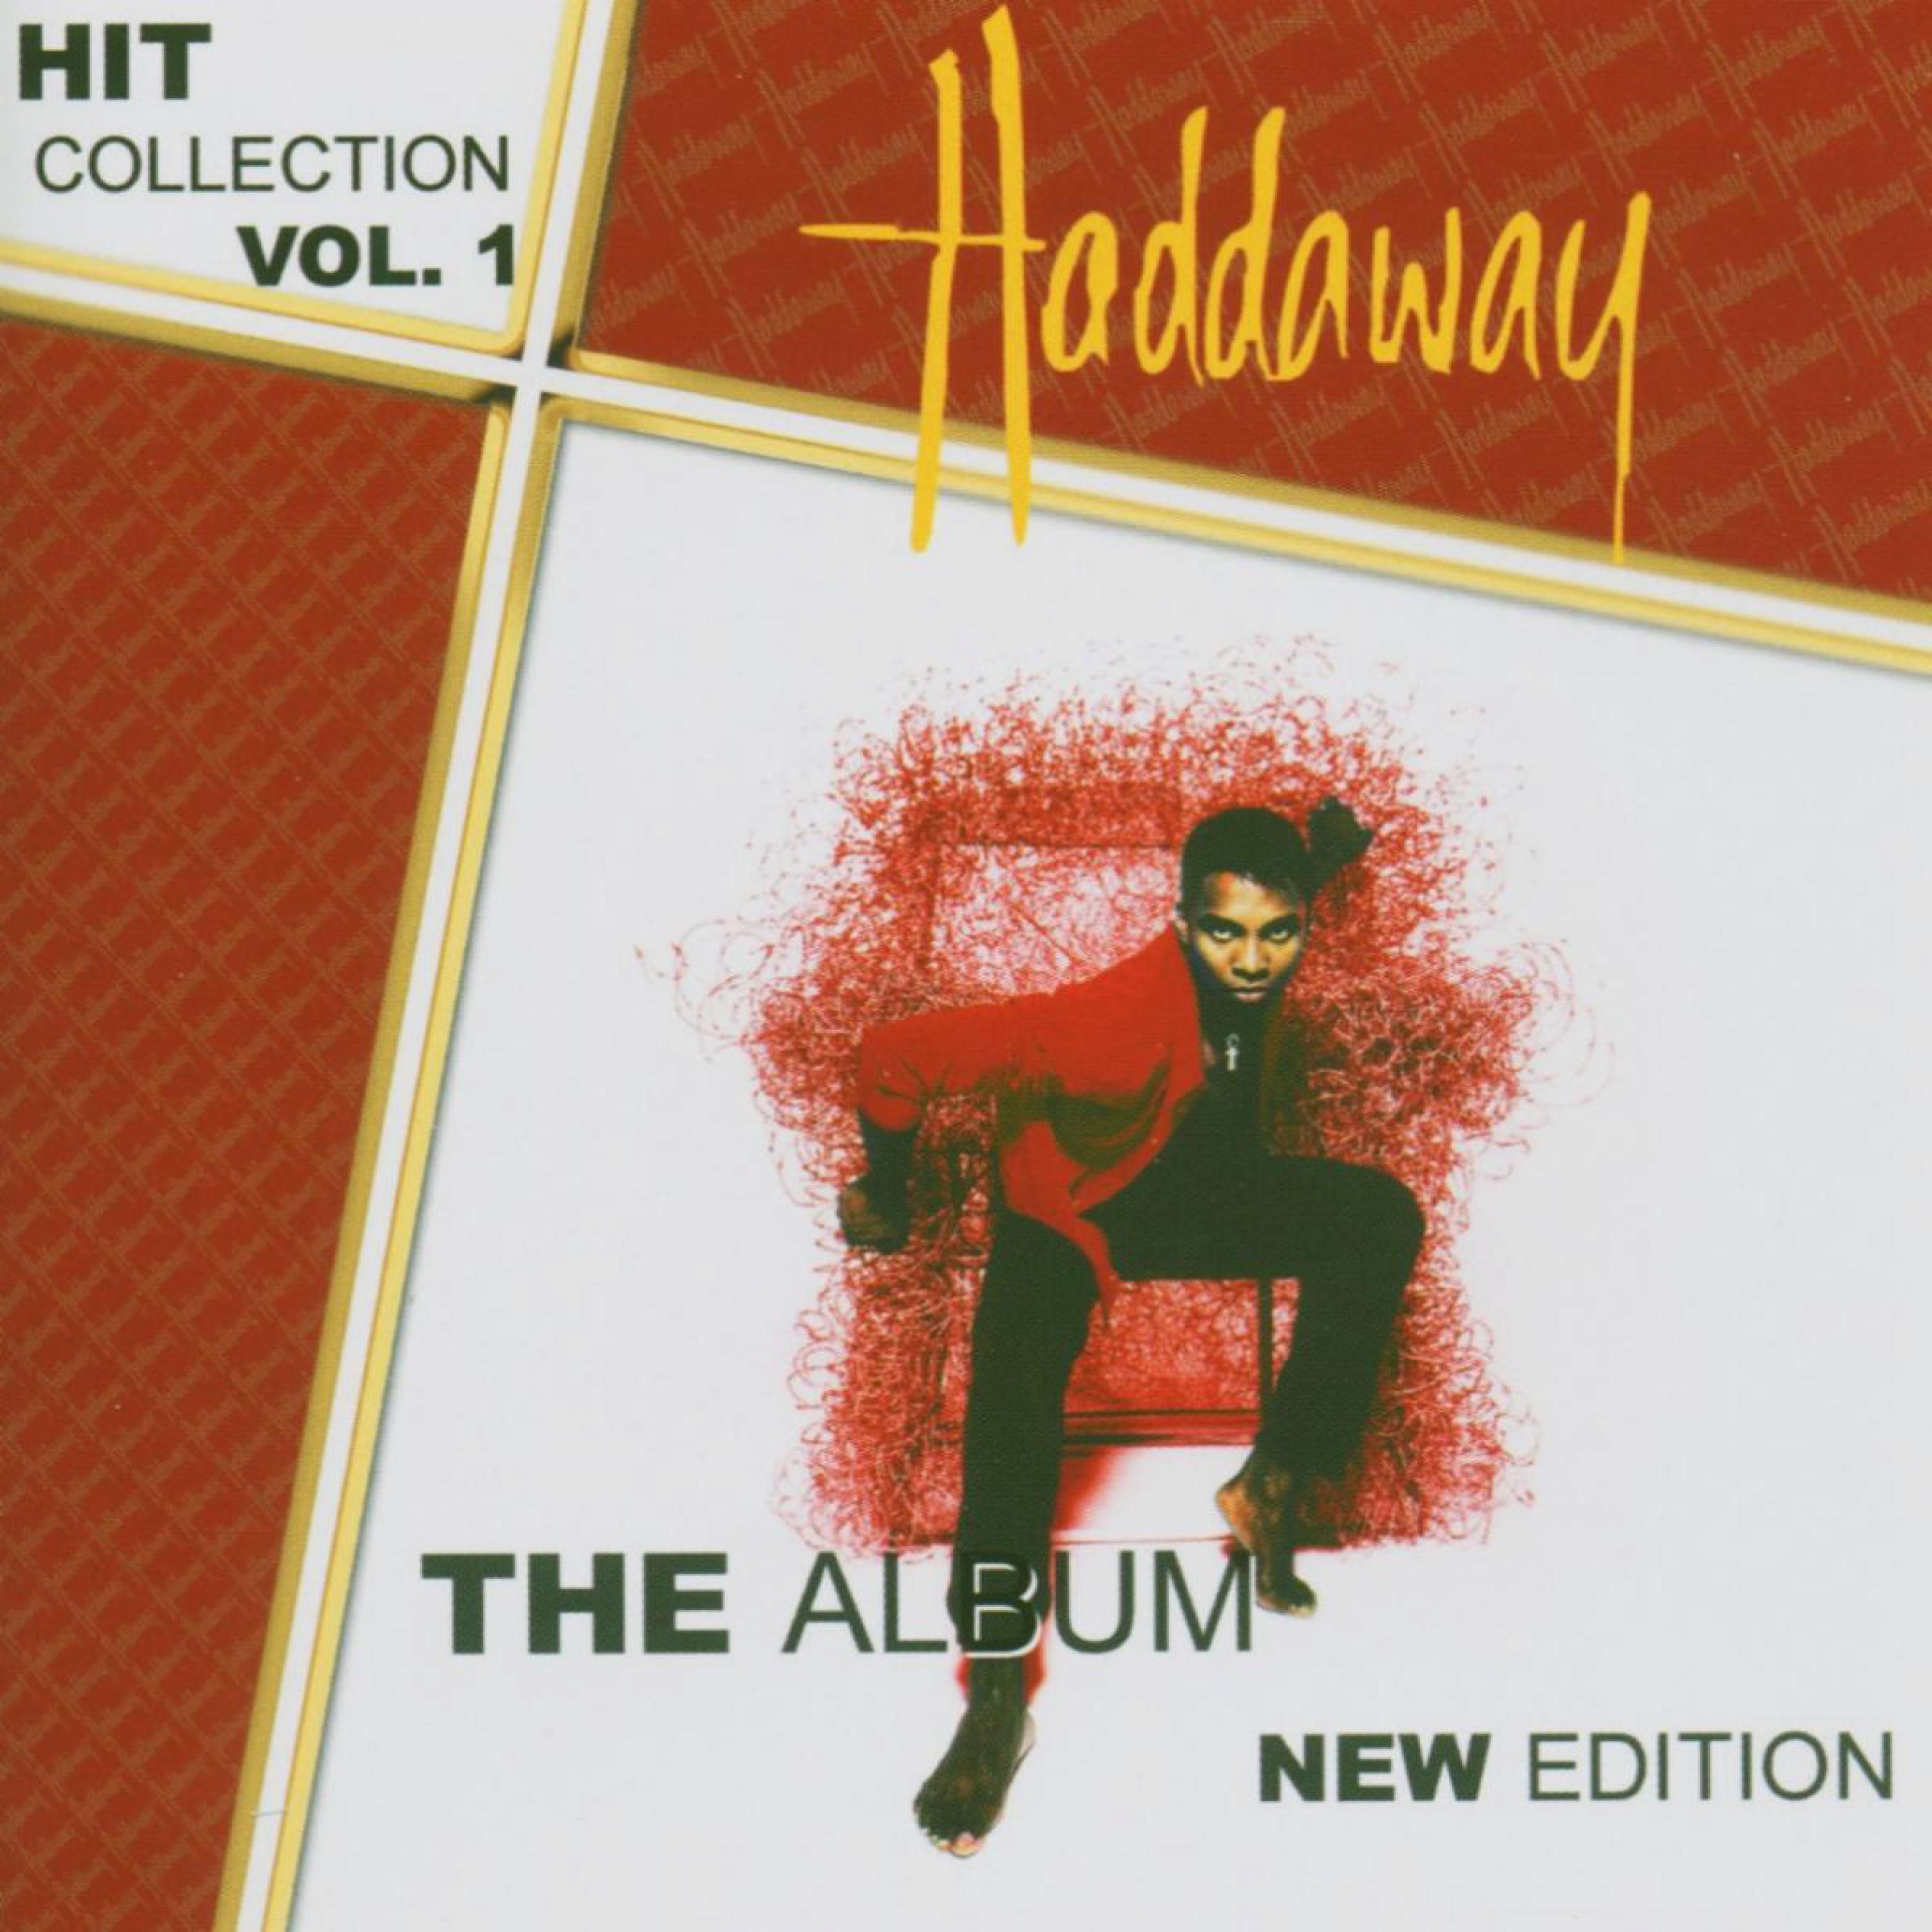 Hit Collection Vol. 1-The Album New Edition专辑